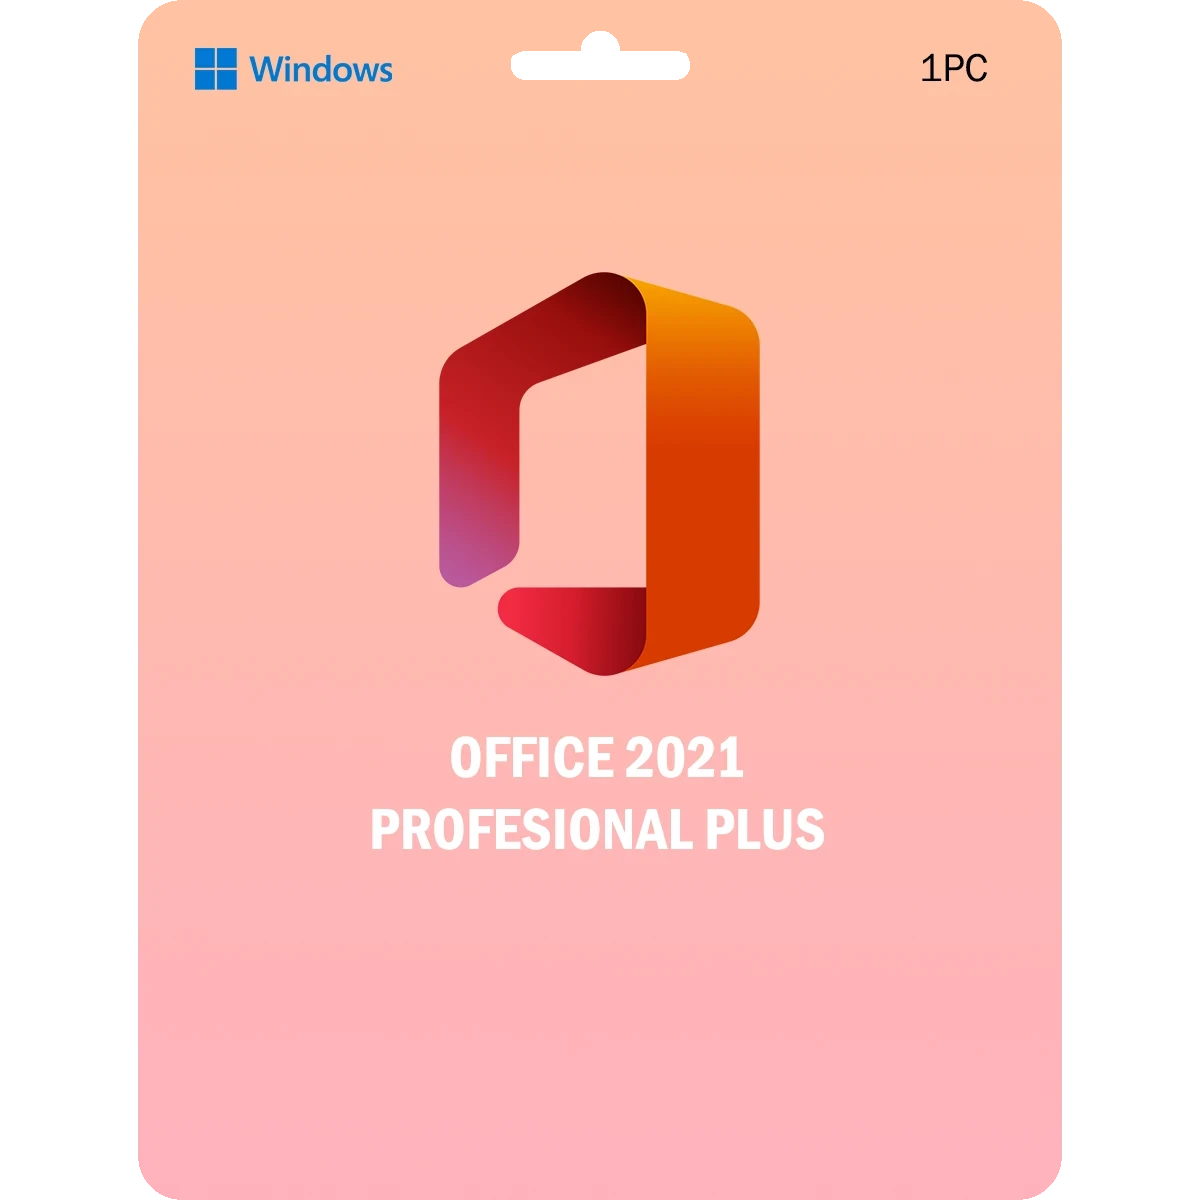 Licencia Office 2021 Profesional Plus 1PC – Software Colombia Tech